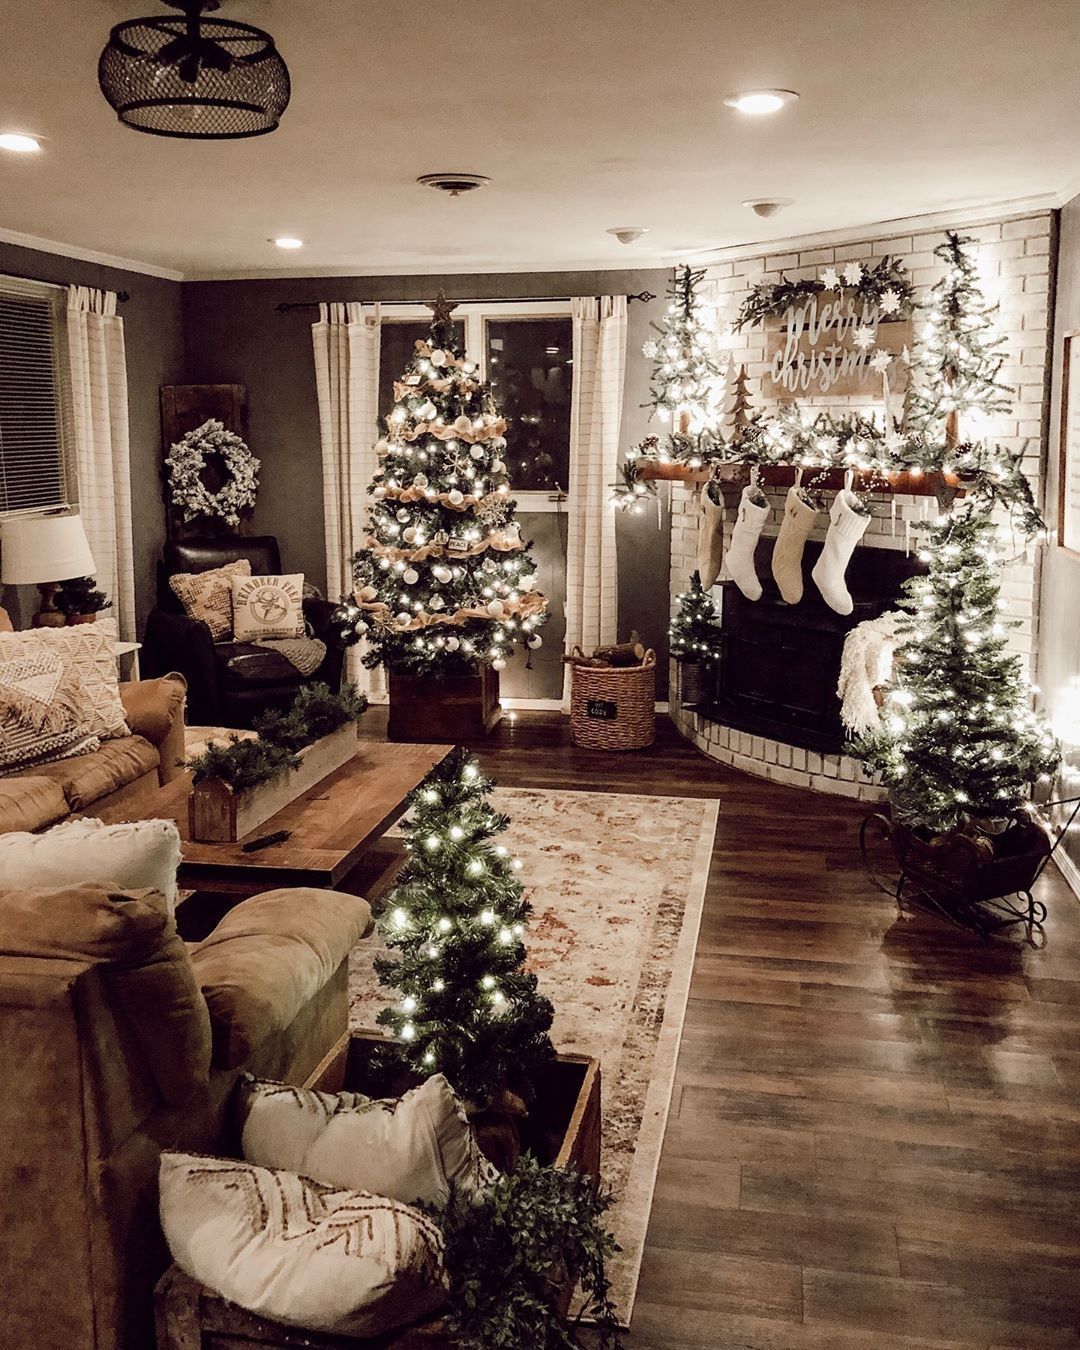 44 Inspiring Decoration Ideas for Holiday Event -   Christmas Decorations, Indoor & Outdoor Ideas